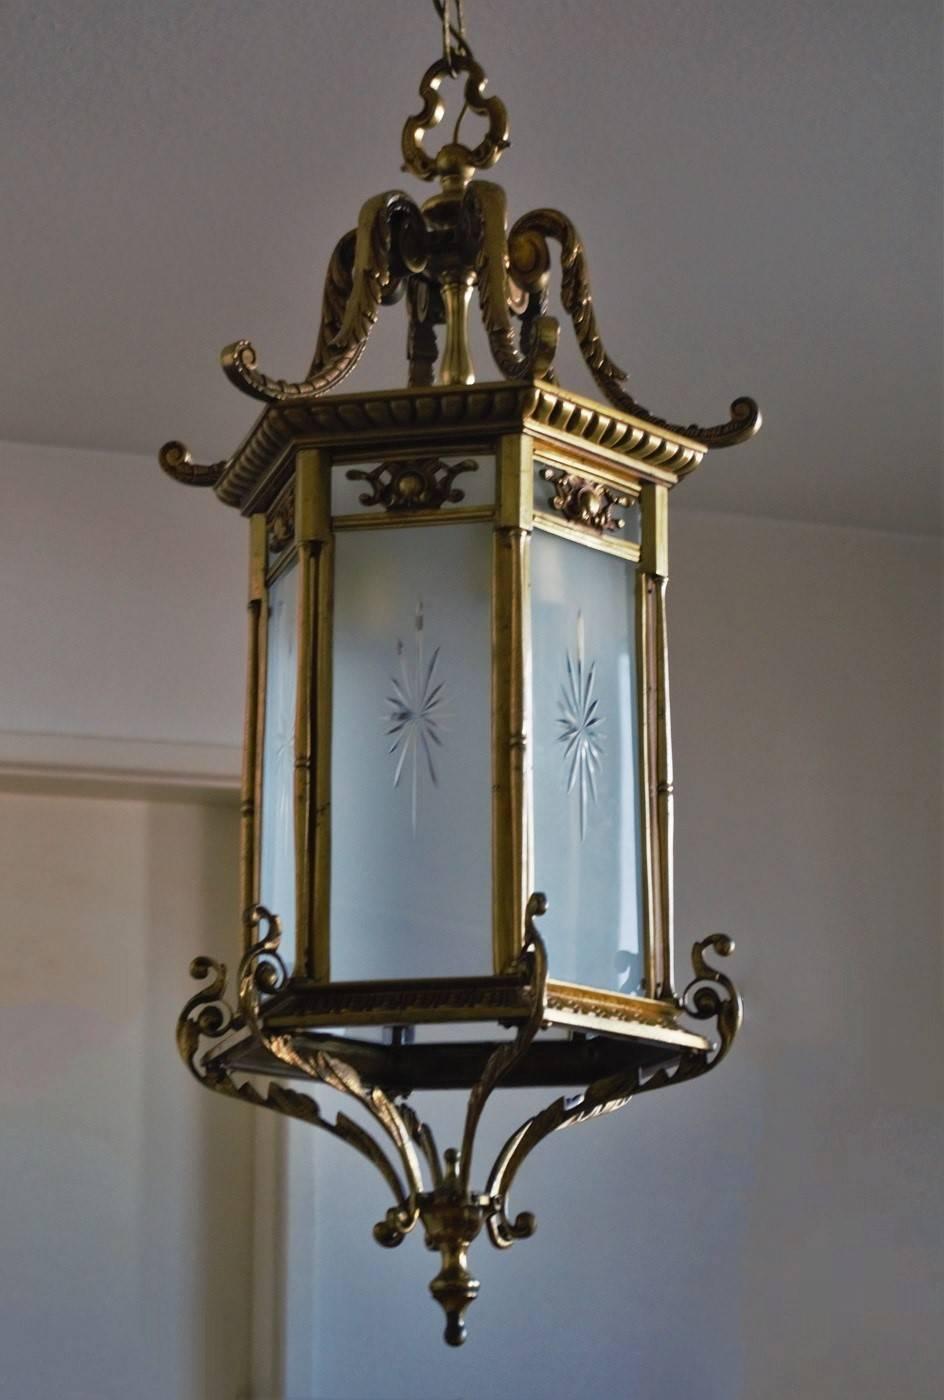 Heavy, large Recency syle thee-light lantern, France circa 1870 - 1880. This lantern is of solid bronze and parcel brass with six frosted cut glass windows. The lantern arrives with beautiful solid bronze canopy and chain. 
Number of lights: Three